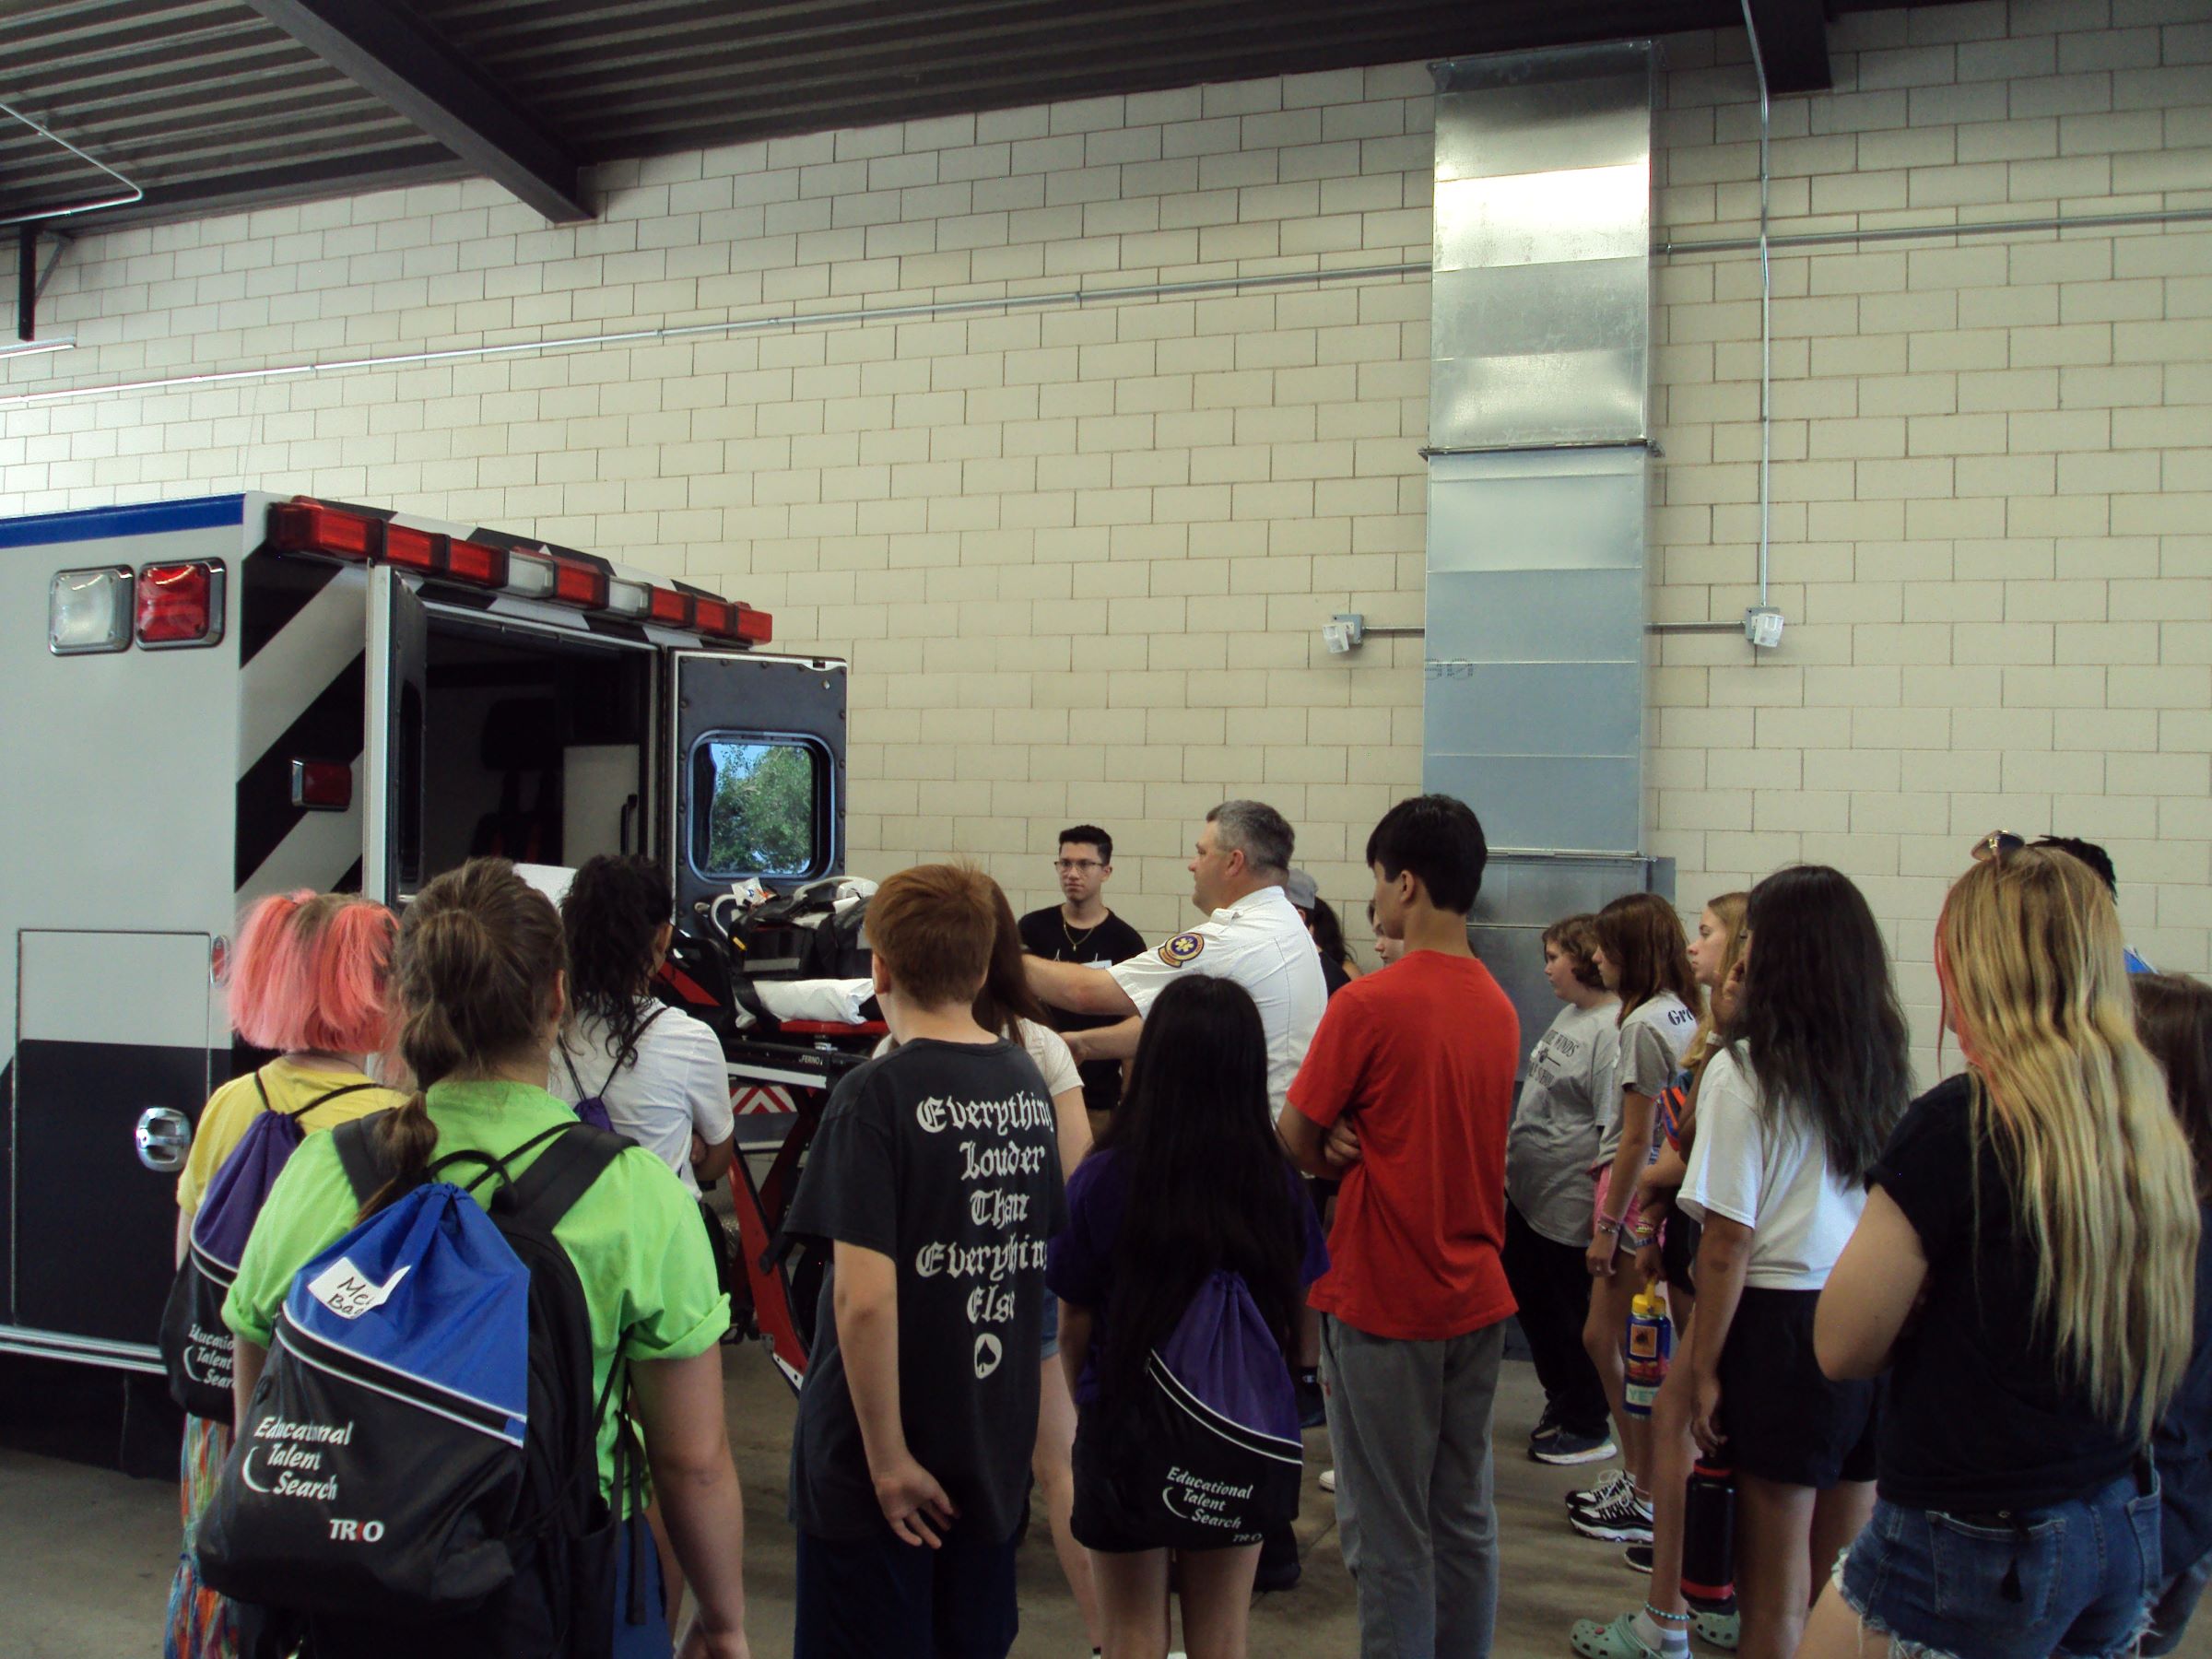 a group of people standing around a ambulance